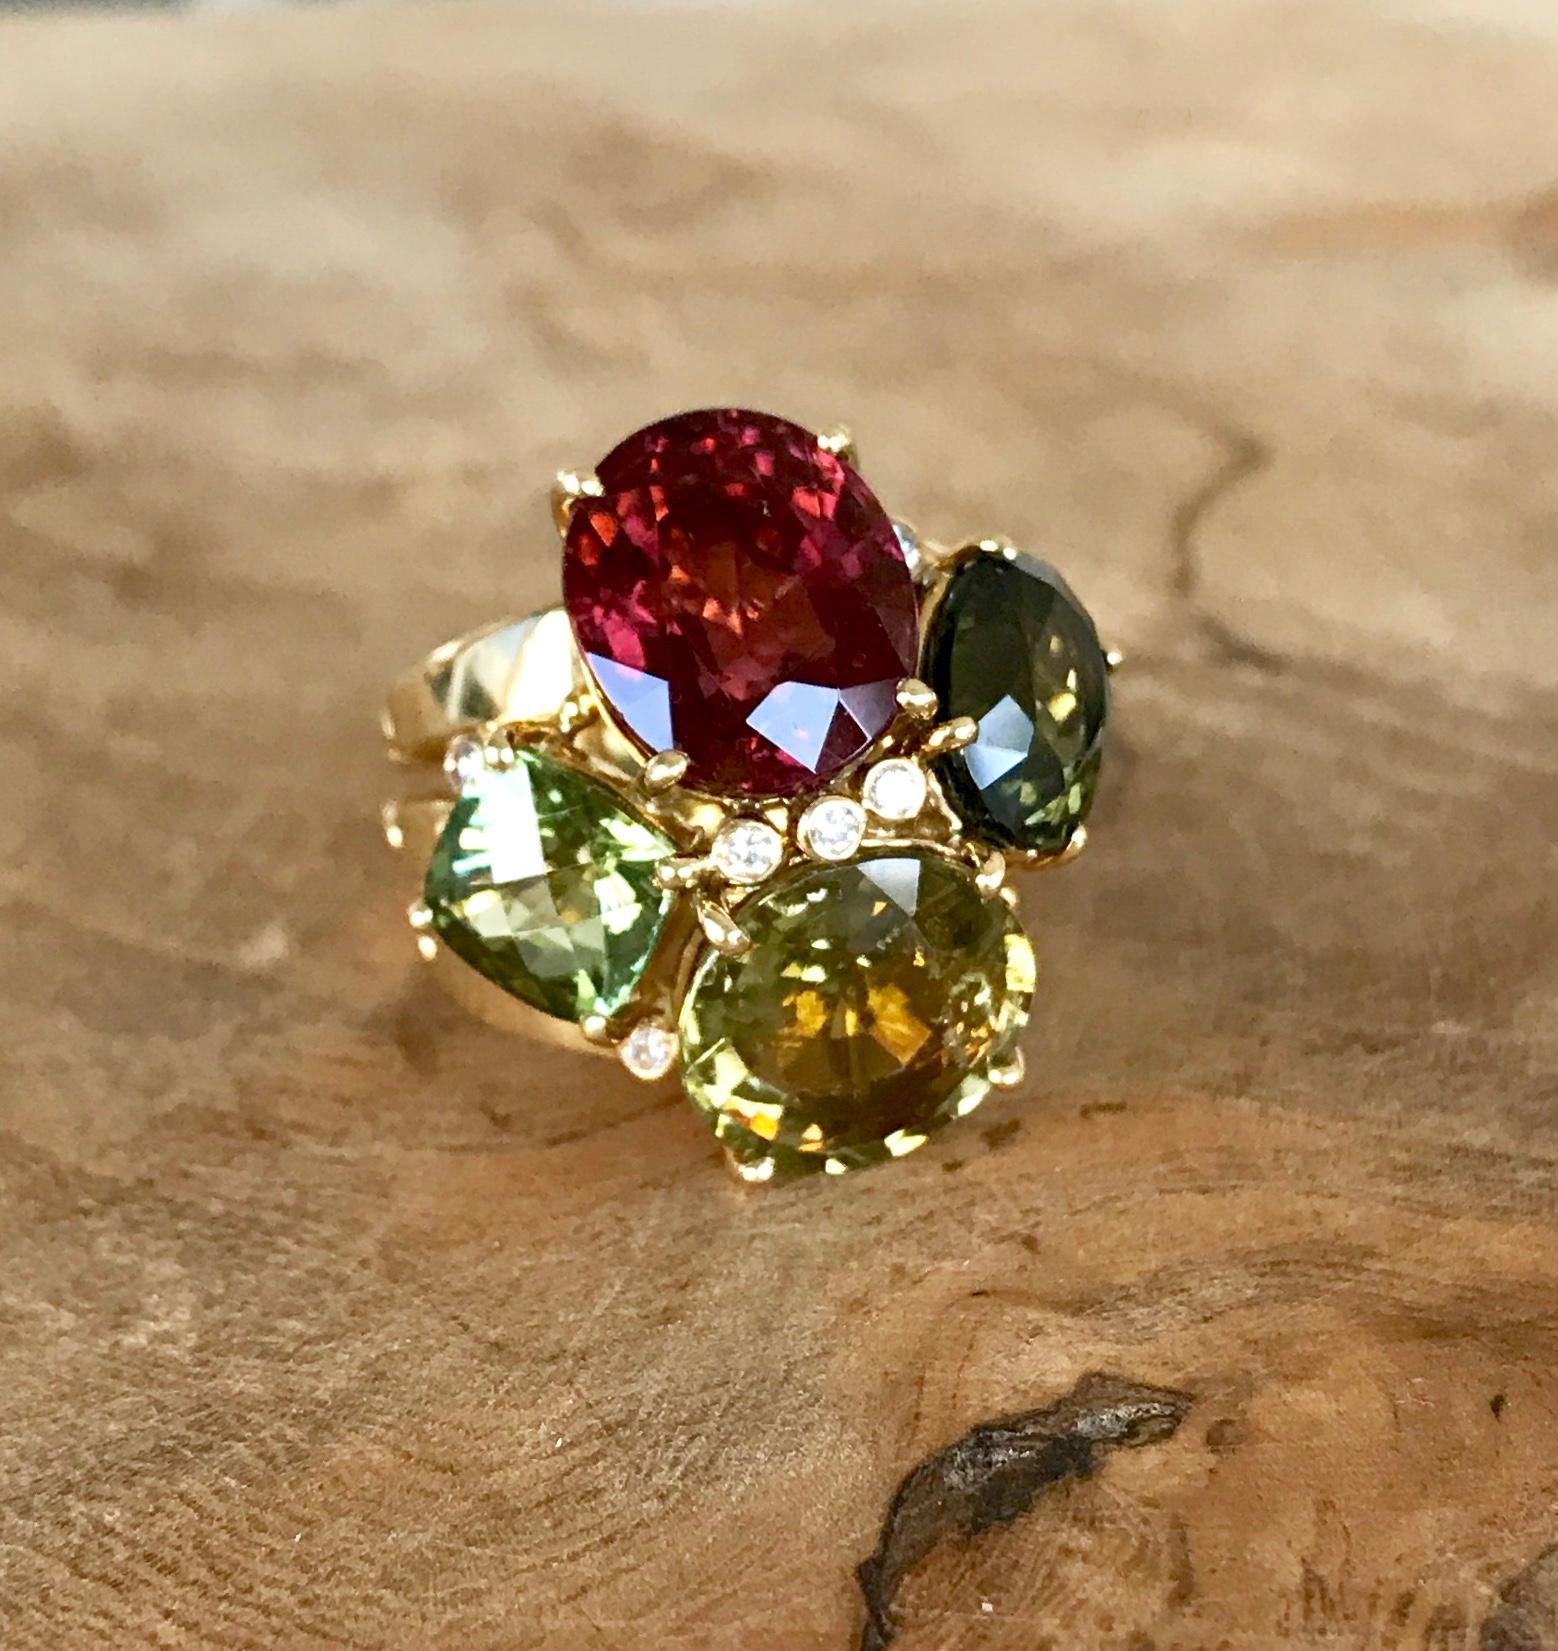 A multi-gemstone cluster cocktail ring with rubellite and green tourmalines and diamonds, handcrafted in 18 karat yellow gold.

This gorgeous one-of-a-kind Joon Han statement ring of four multicolored tourmalines in different shapes and colors, with